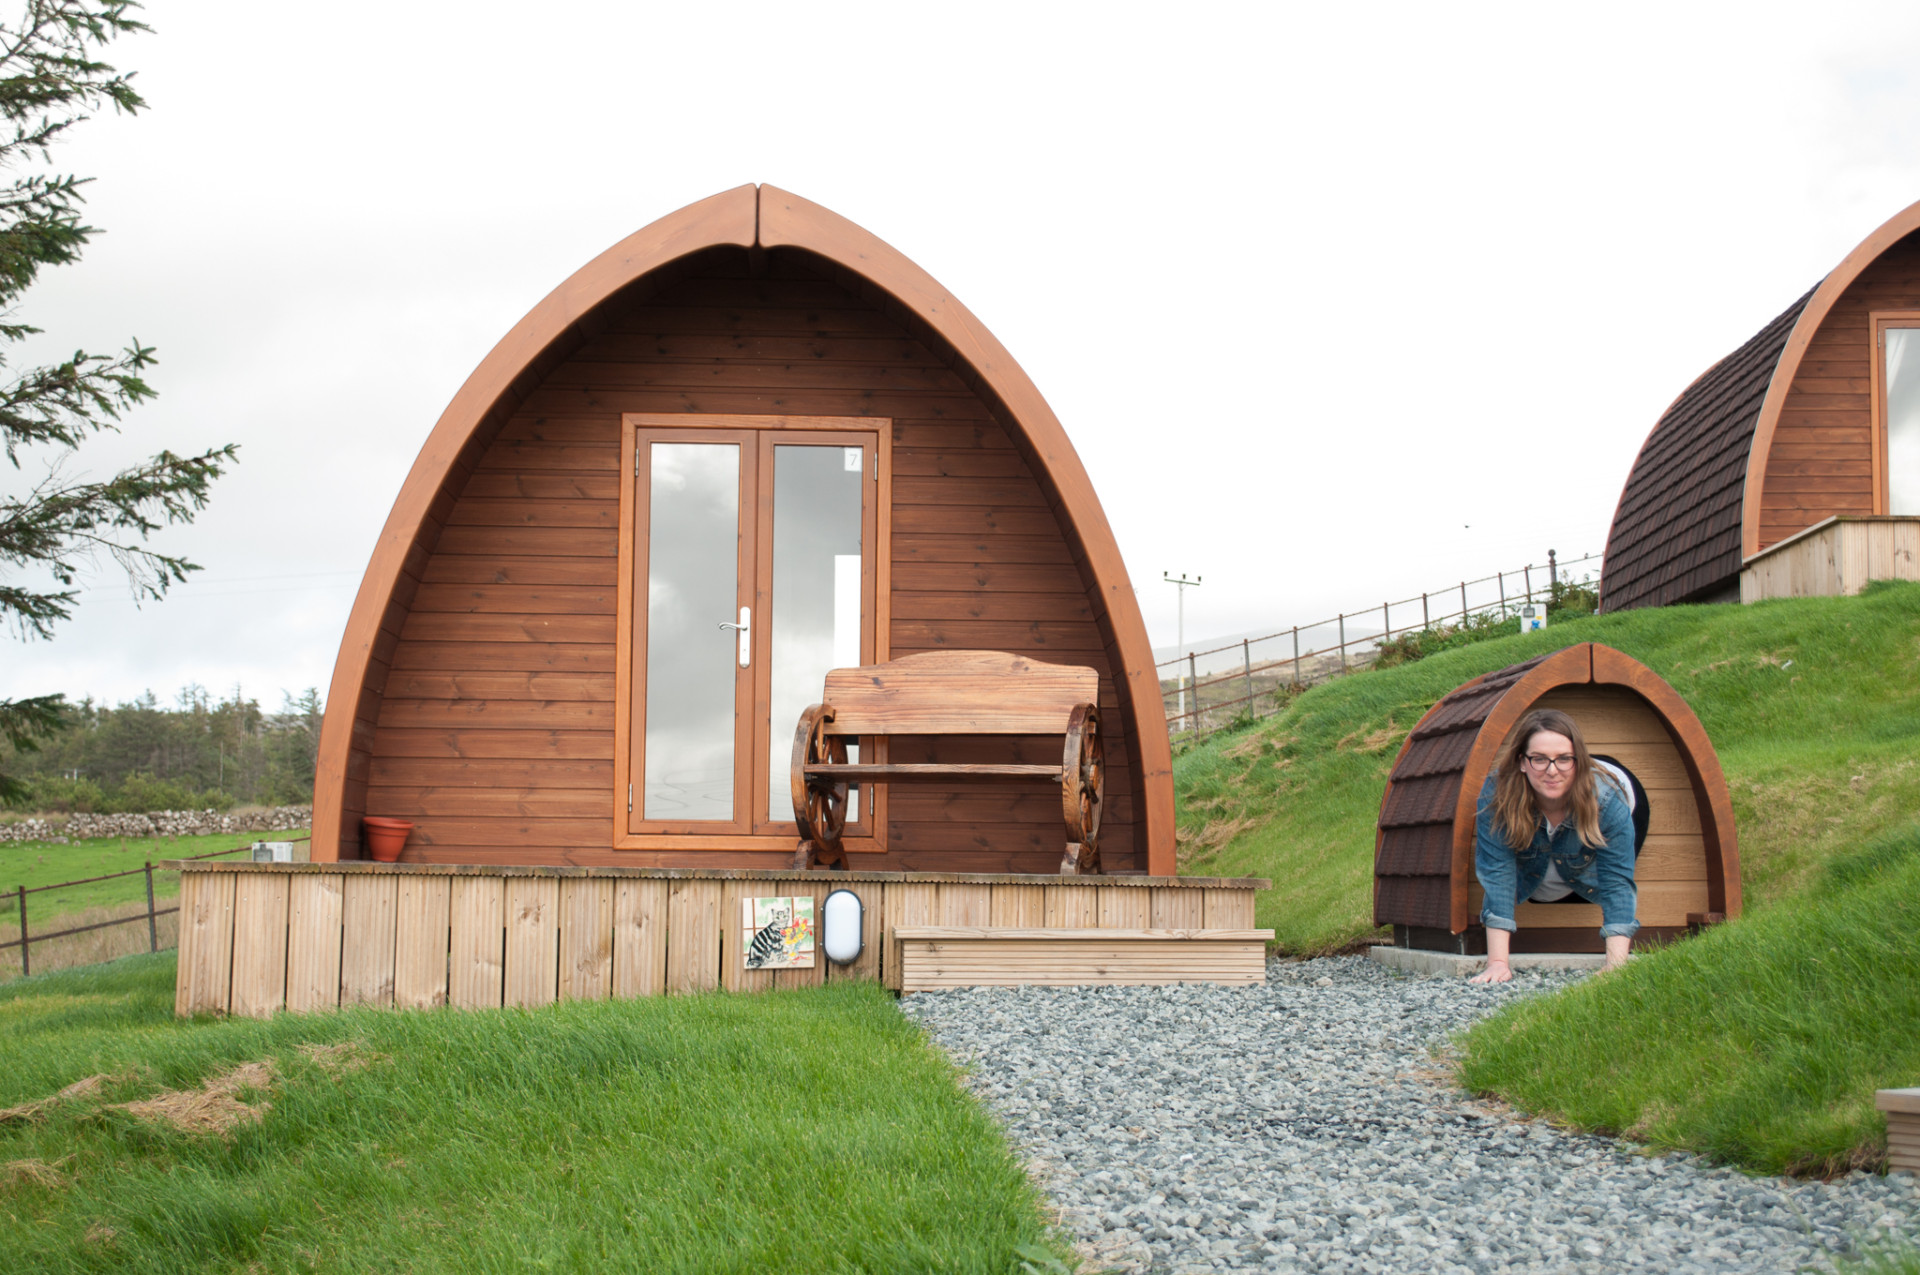 Where to stay on the Isle of Skye - The Cowshed Bunkhouse Review